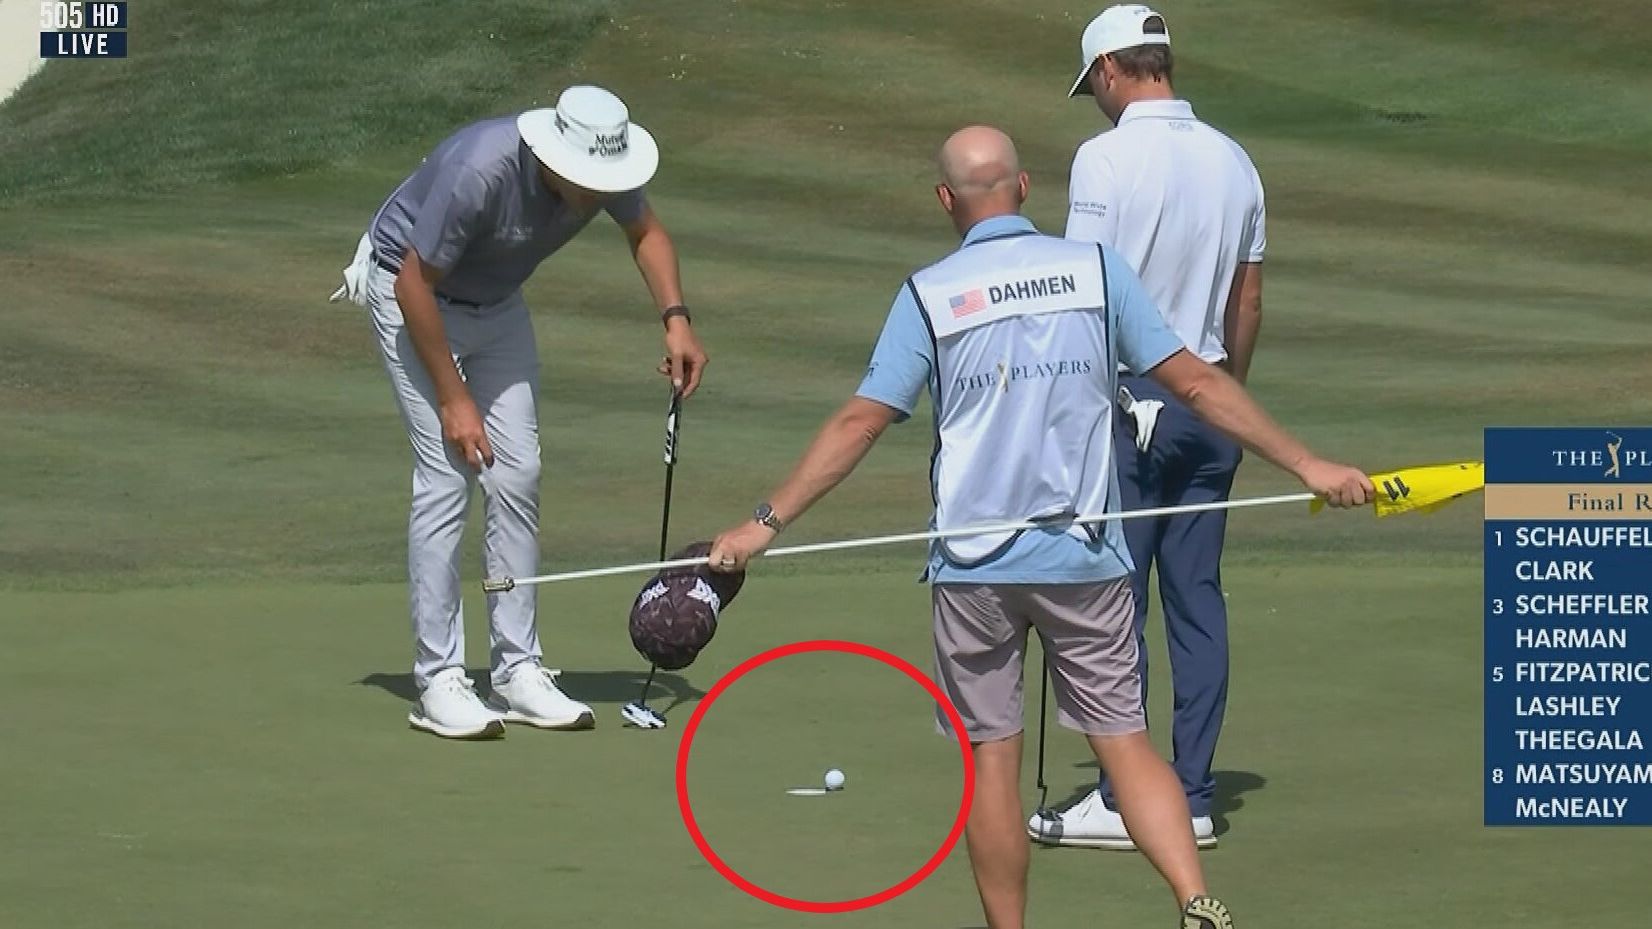 'You can't lollygag around': Golf star robbed of crucial birdie despite ball falling in hole